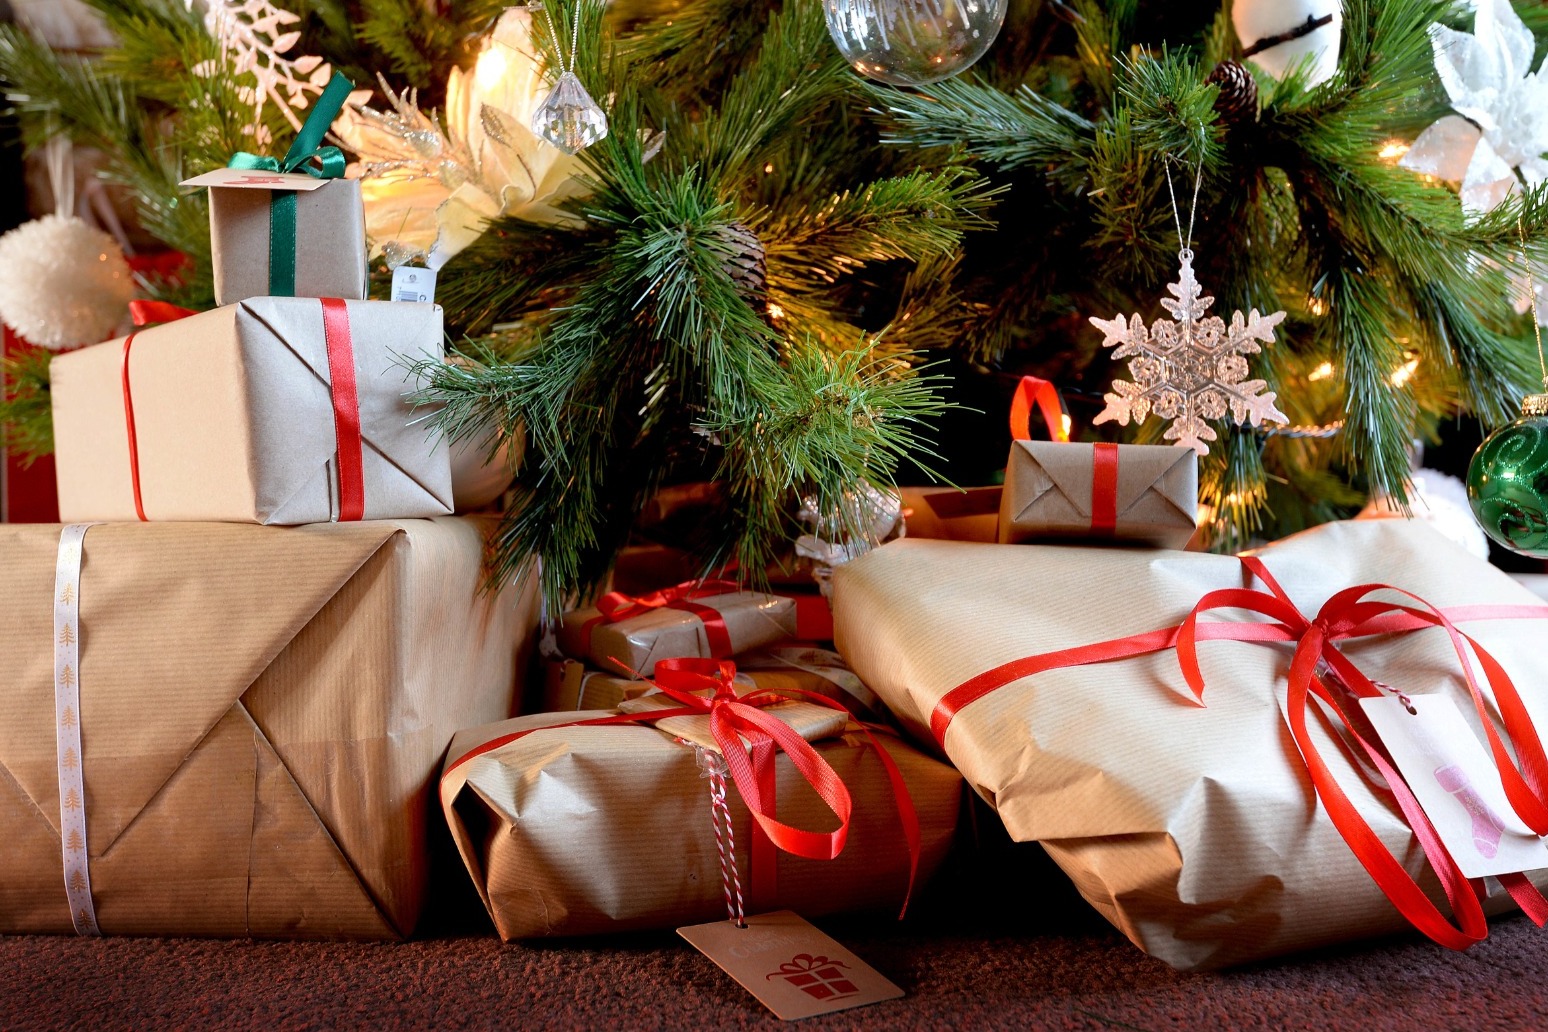 Third of consumers plan to return or give up Christmas gifts, poll finds 